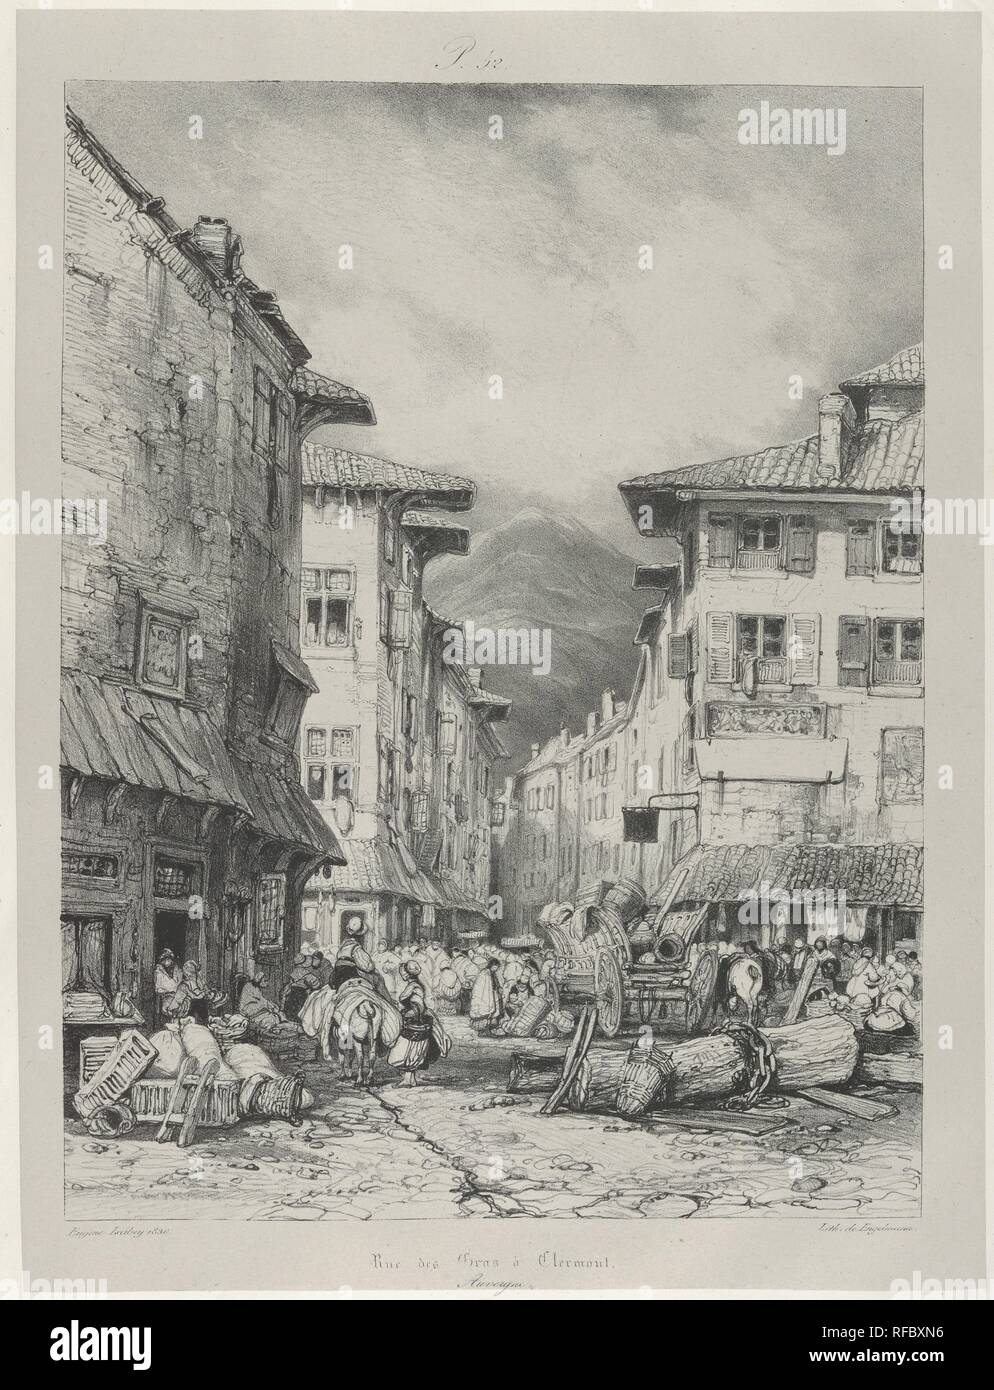 EugÃ¨ne Isabey (French, Paris 1803â€“1886 Lagny) Rue de Gros in Clermont, 1833 French,  Lithograph in black on light gray chine collÃ© laid down on ivory wove paper; second state of two; Sheet: 18 11/16 Ã— 13 7/16 in. (47.5 Ã— 34.2 cm) Plate: 12 11/16 Ã— 9 1/2 in. (32.2 Ã— 24.2 cm) The Metropolitan Museum of Art, New York, Gift of W.G. Russell Allen, 1923 (23.108.10) http://www.metmuseum.org/Collections/search-the-collections/688166 Stock Photo